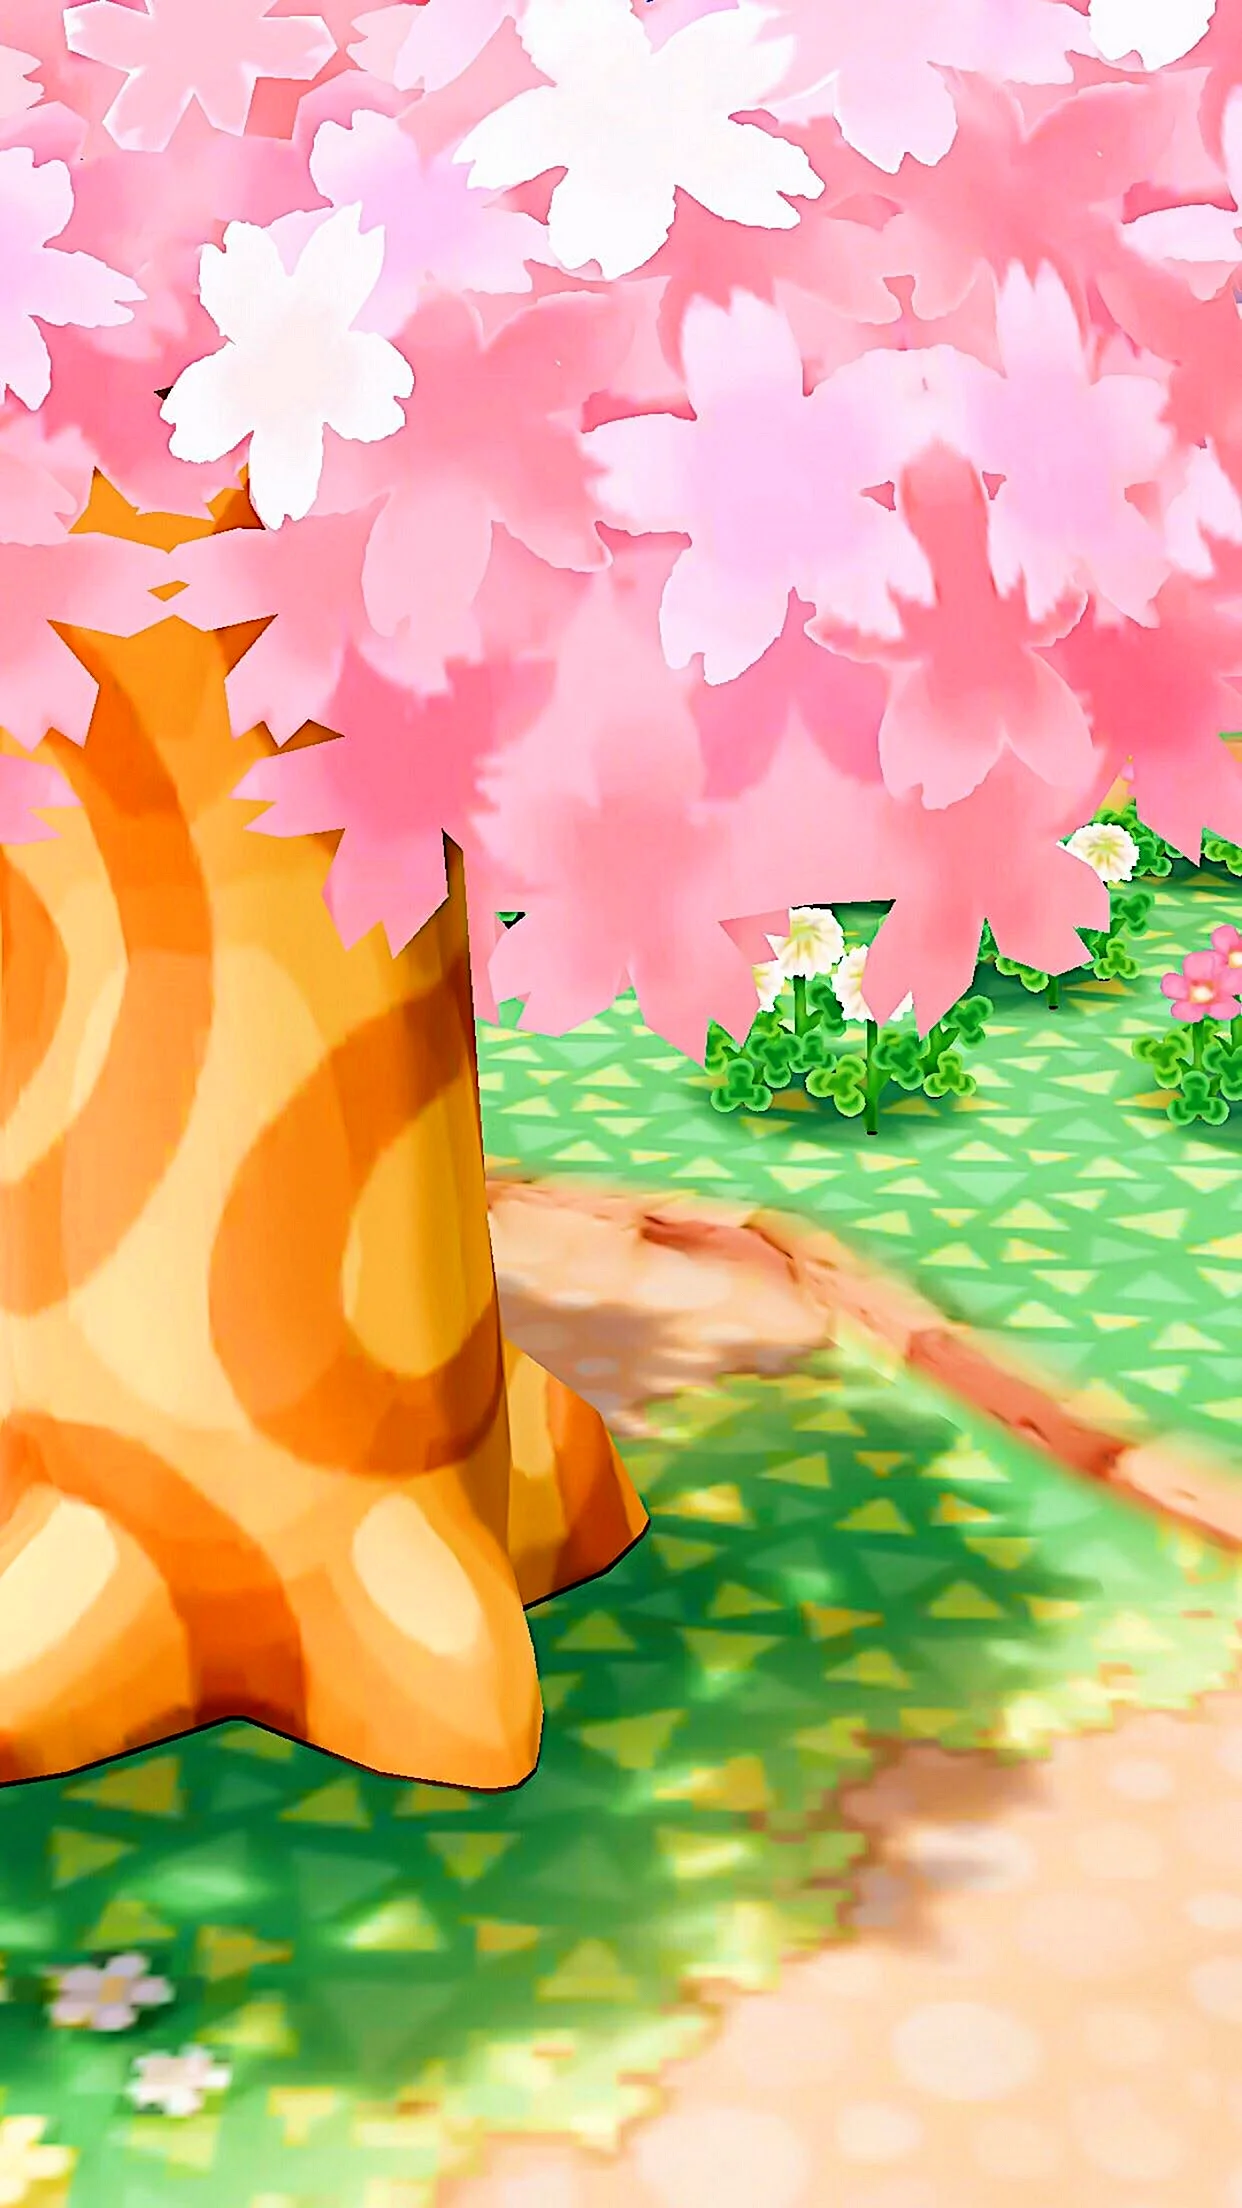 Animal Crossing New Horizons Wallpaper For iPhone